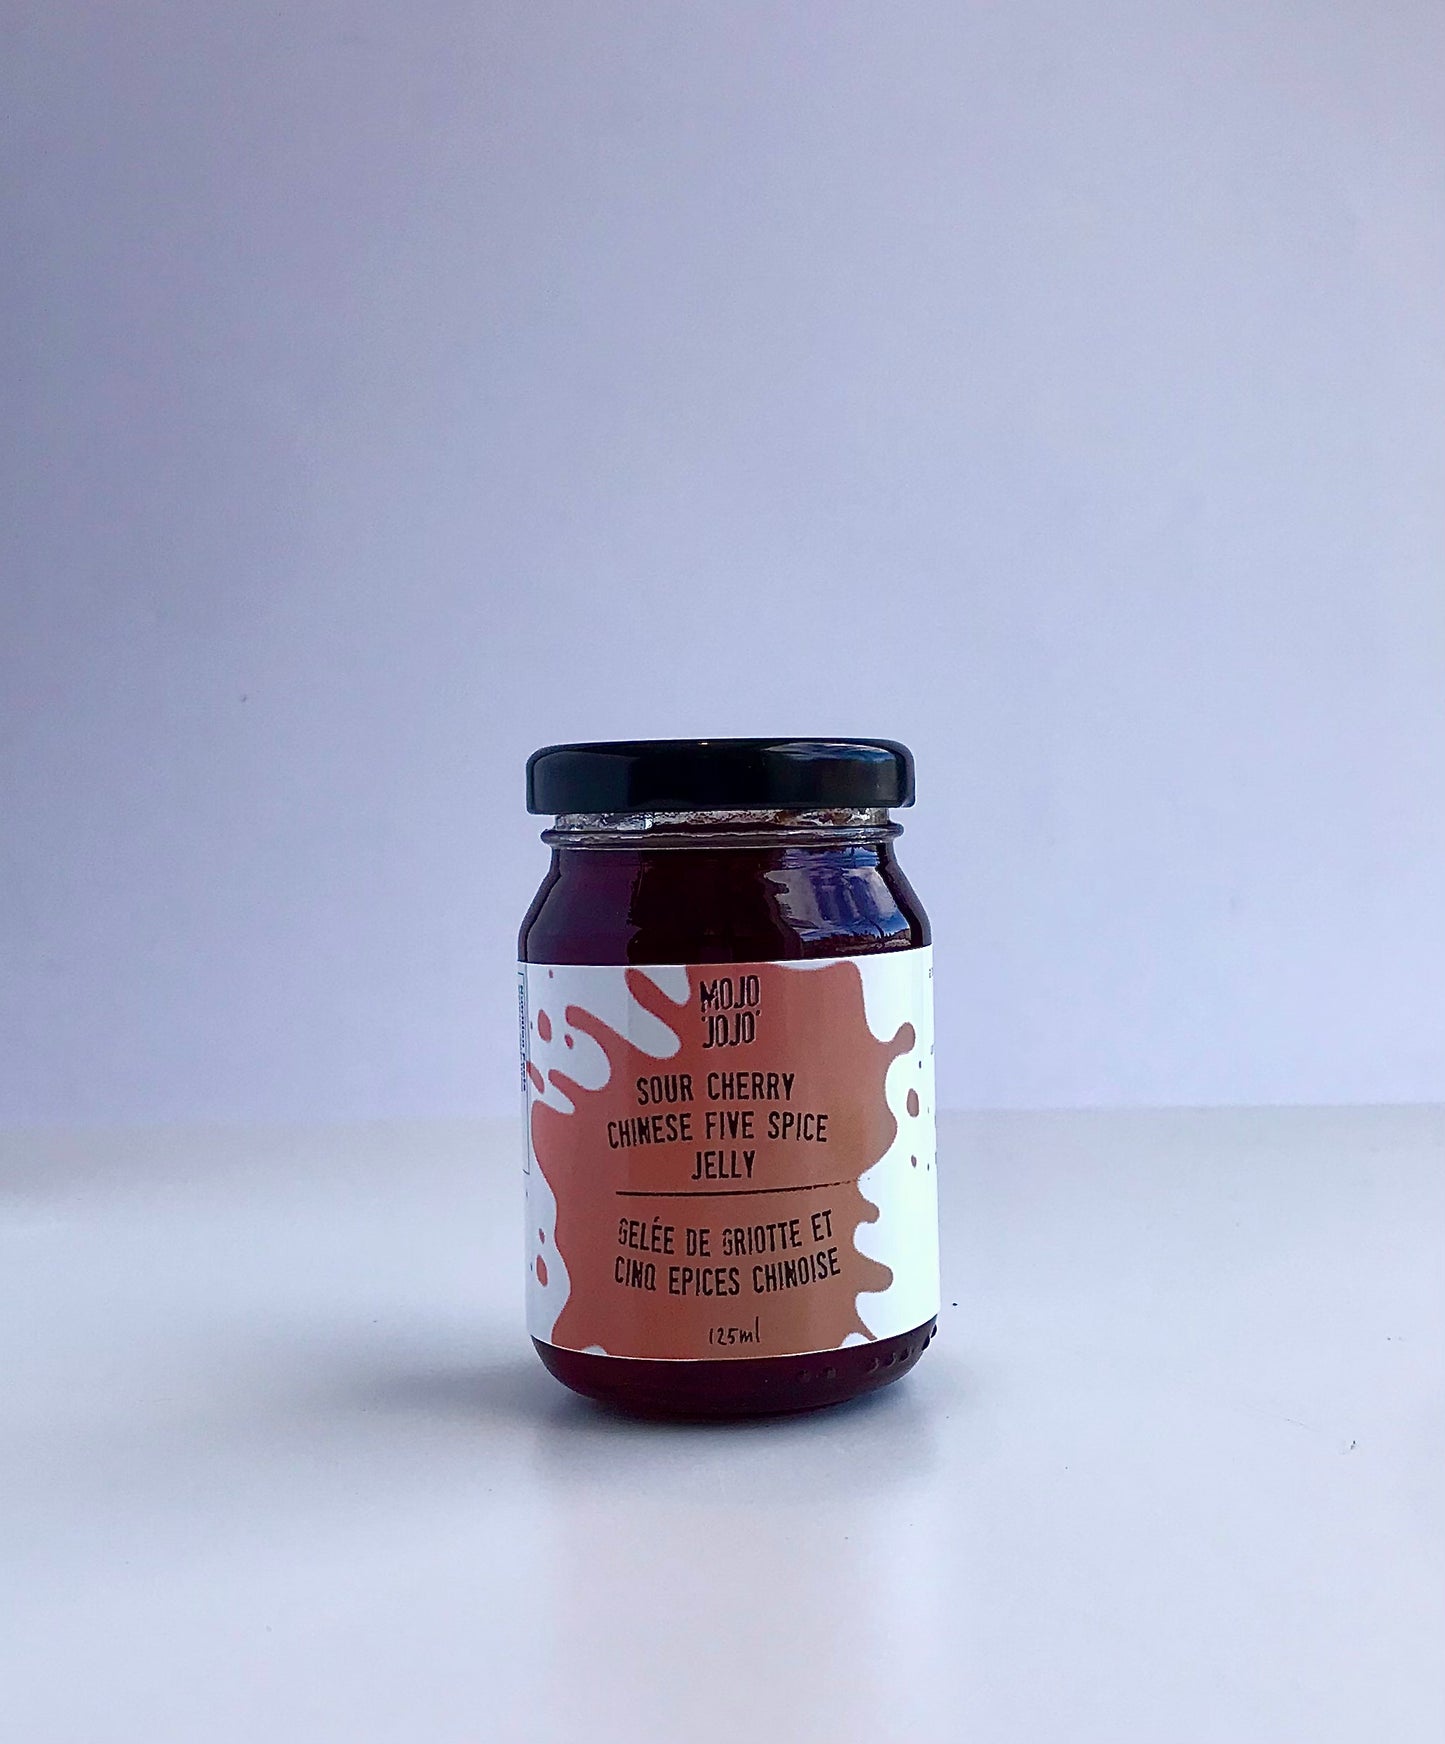 Wholesale Charcuterie Jelly